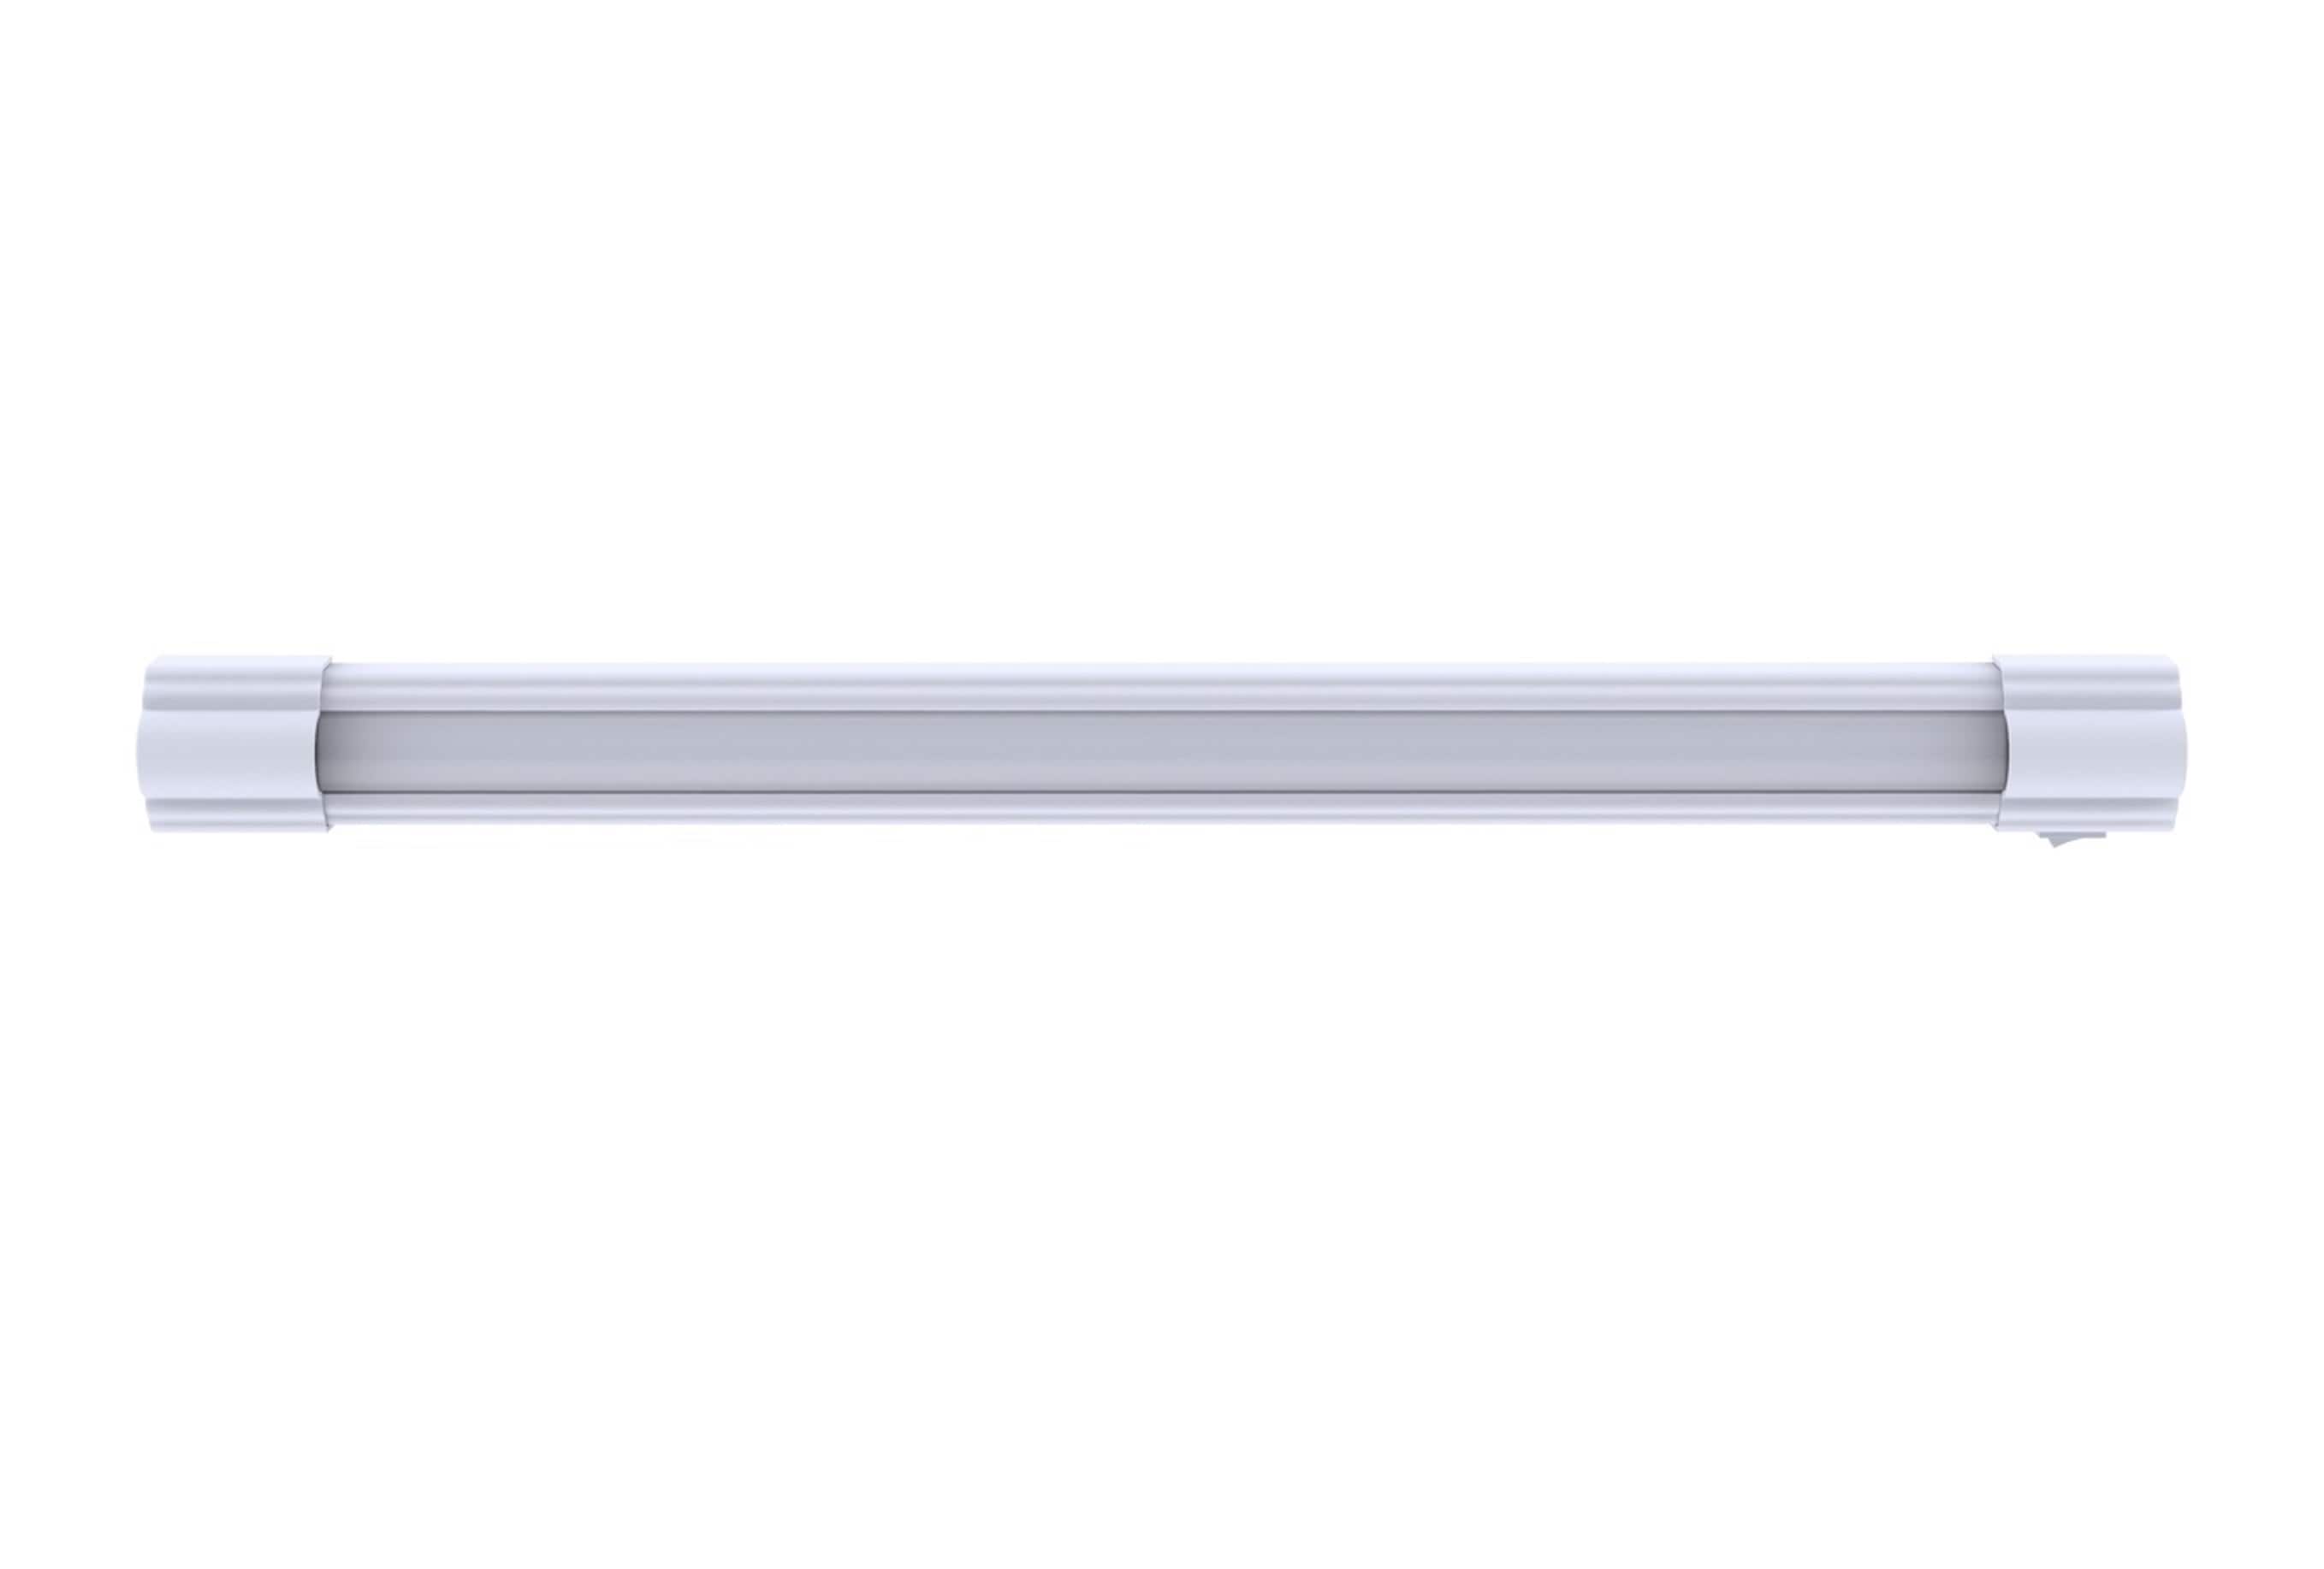 Designer Series Under Cabinet LED Lighting Kit Ten 10" Panels Warm White Dimmable Plug and Play - 3